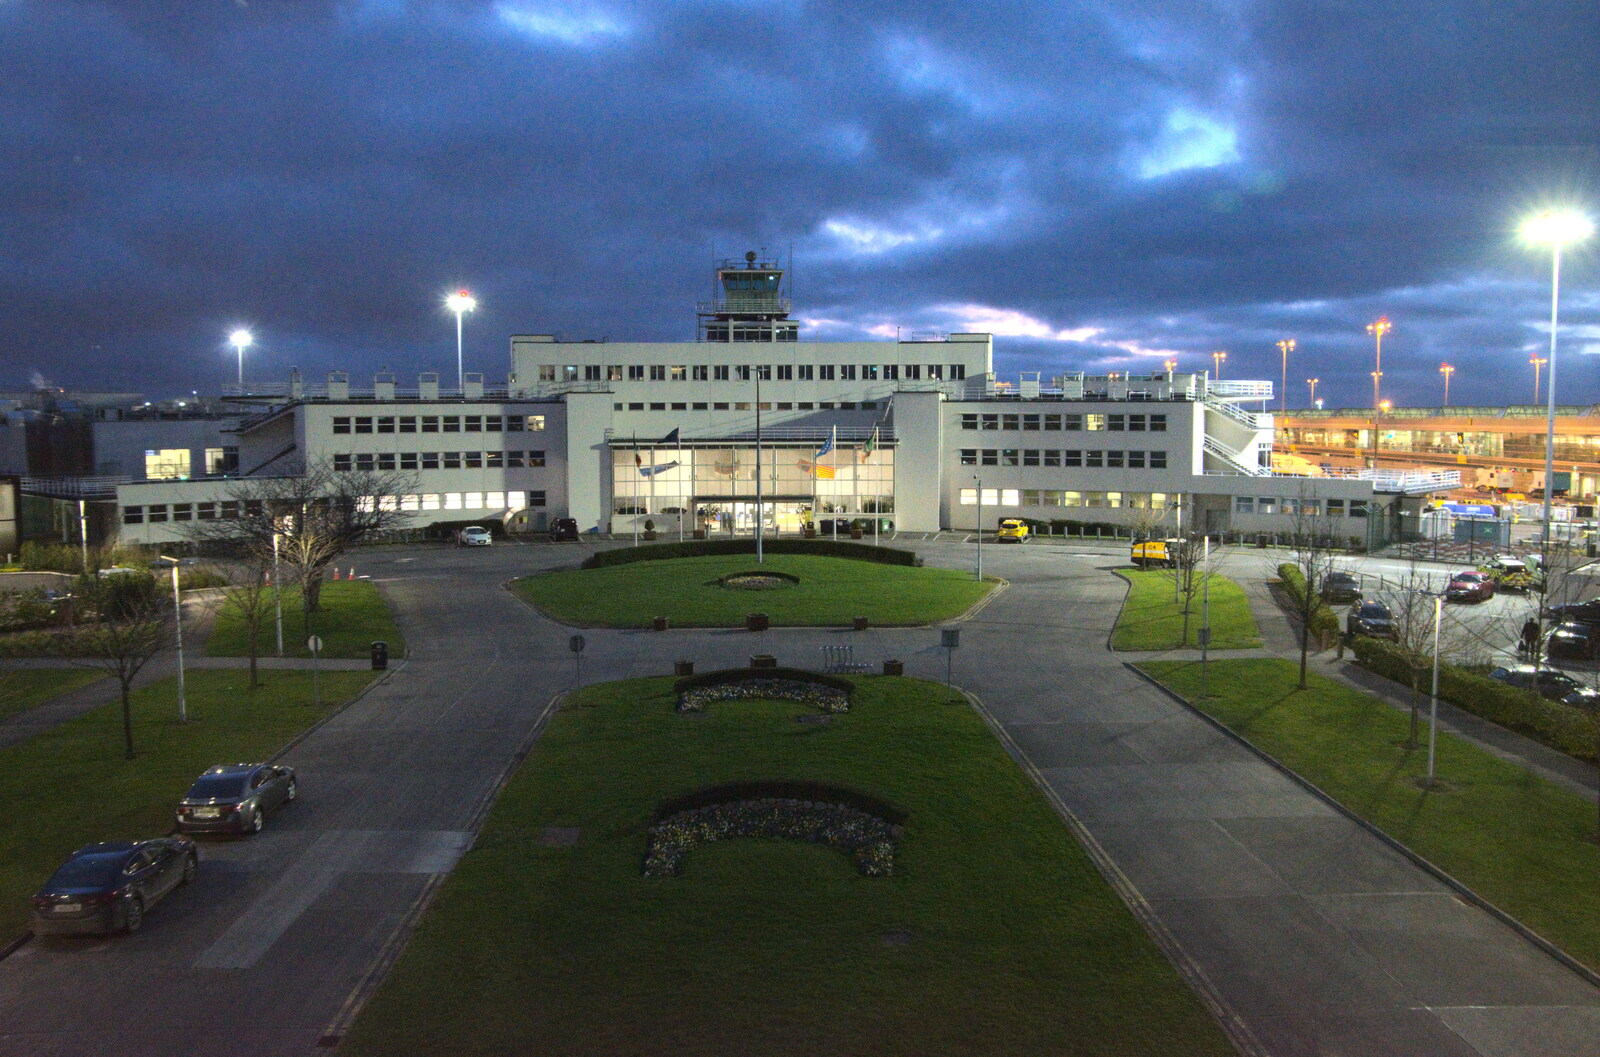 The End of the Breffni, Blackrock, Dublin - 18th February 2023: Dublin's old terminal and control tower